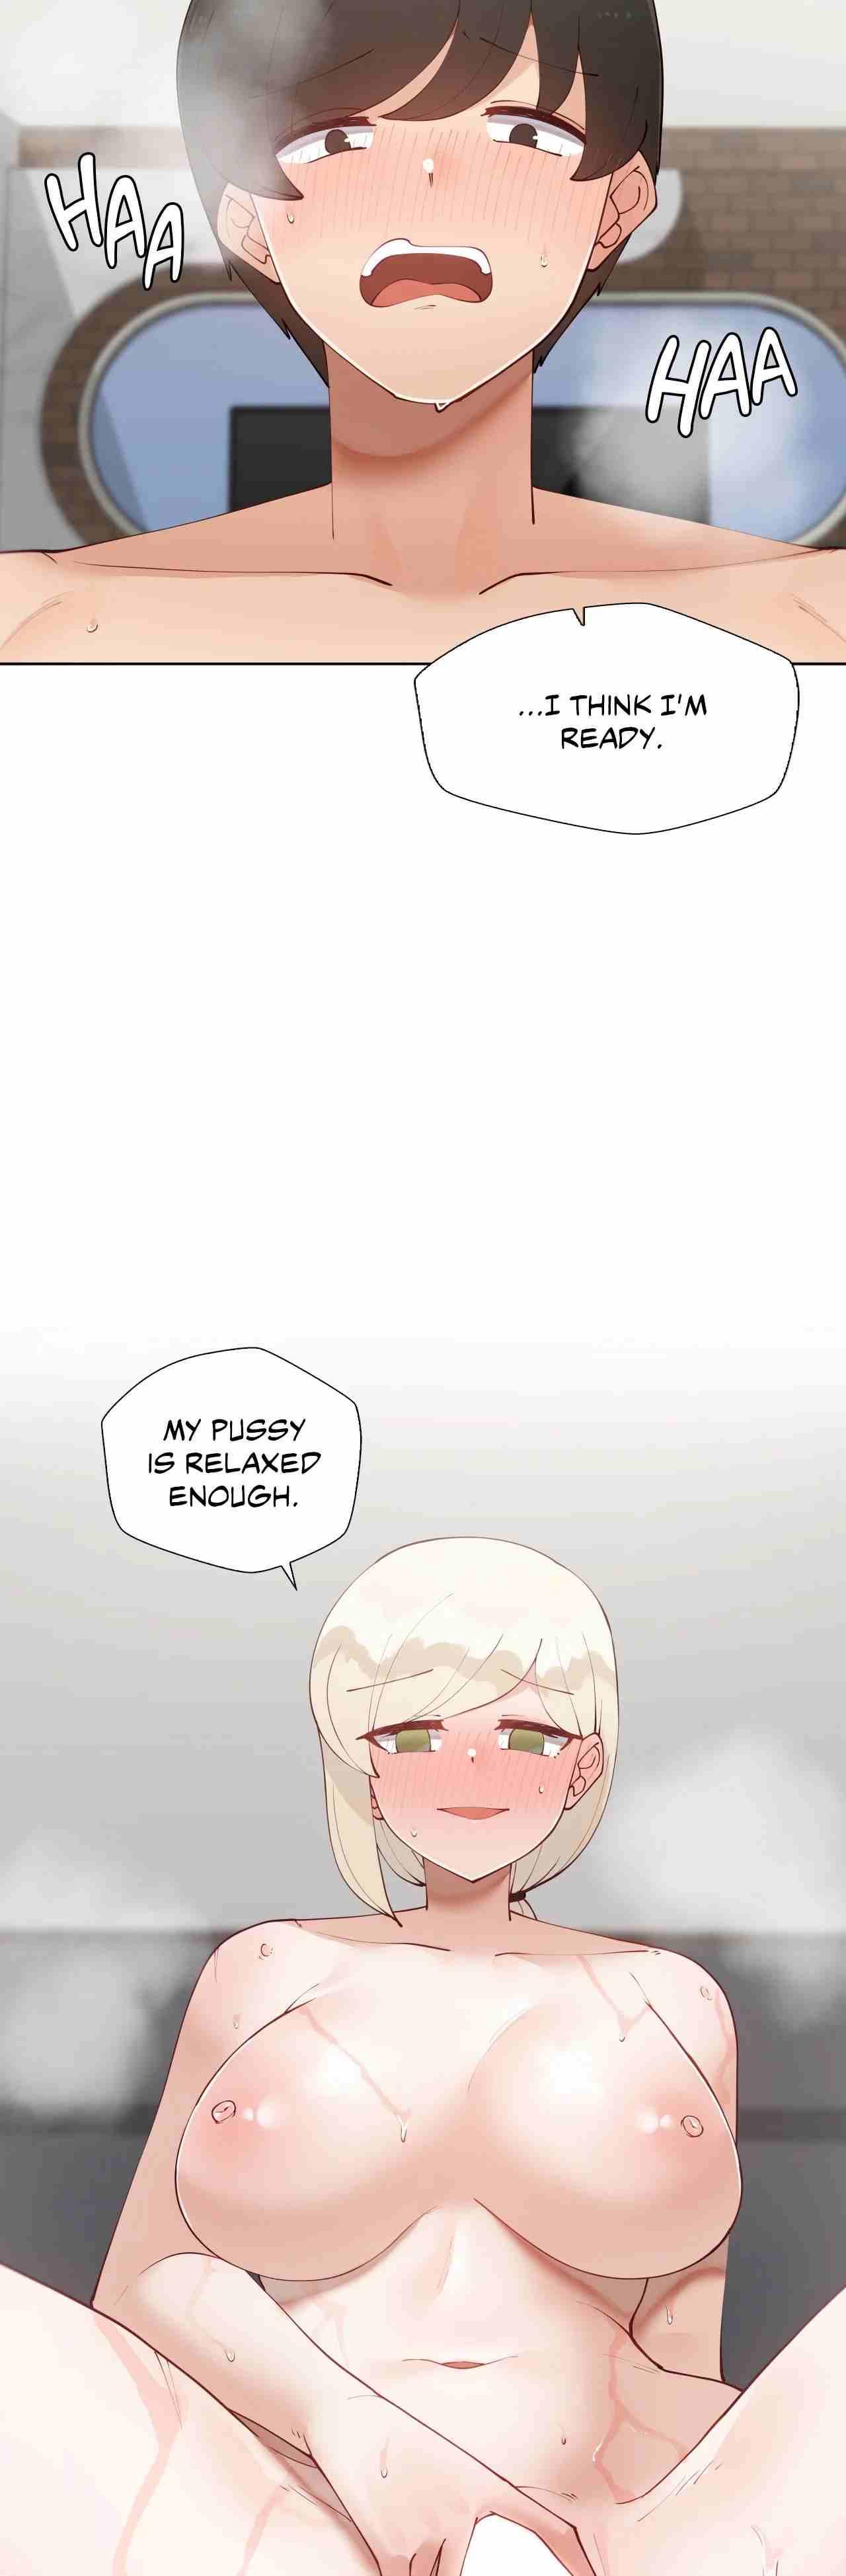 [Over.J, Choi Tae-young] Learning the Hard Way 2nd Season (After Story) Ch.2/? [English] [Manhwa PDF] Ongoing 29